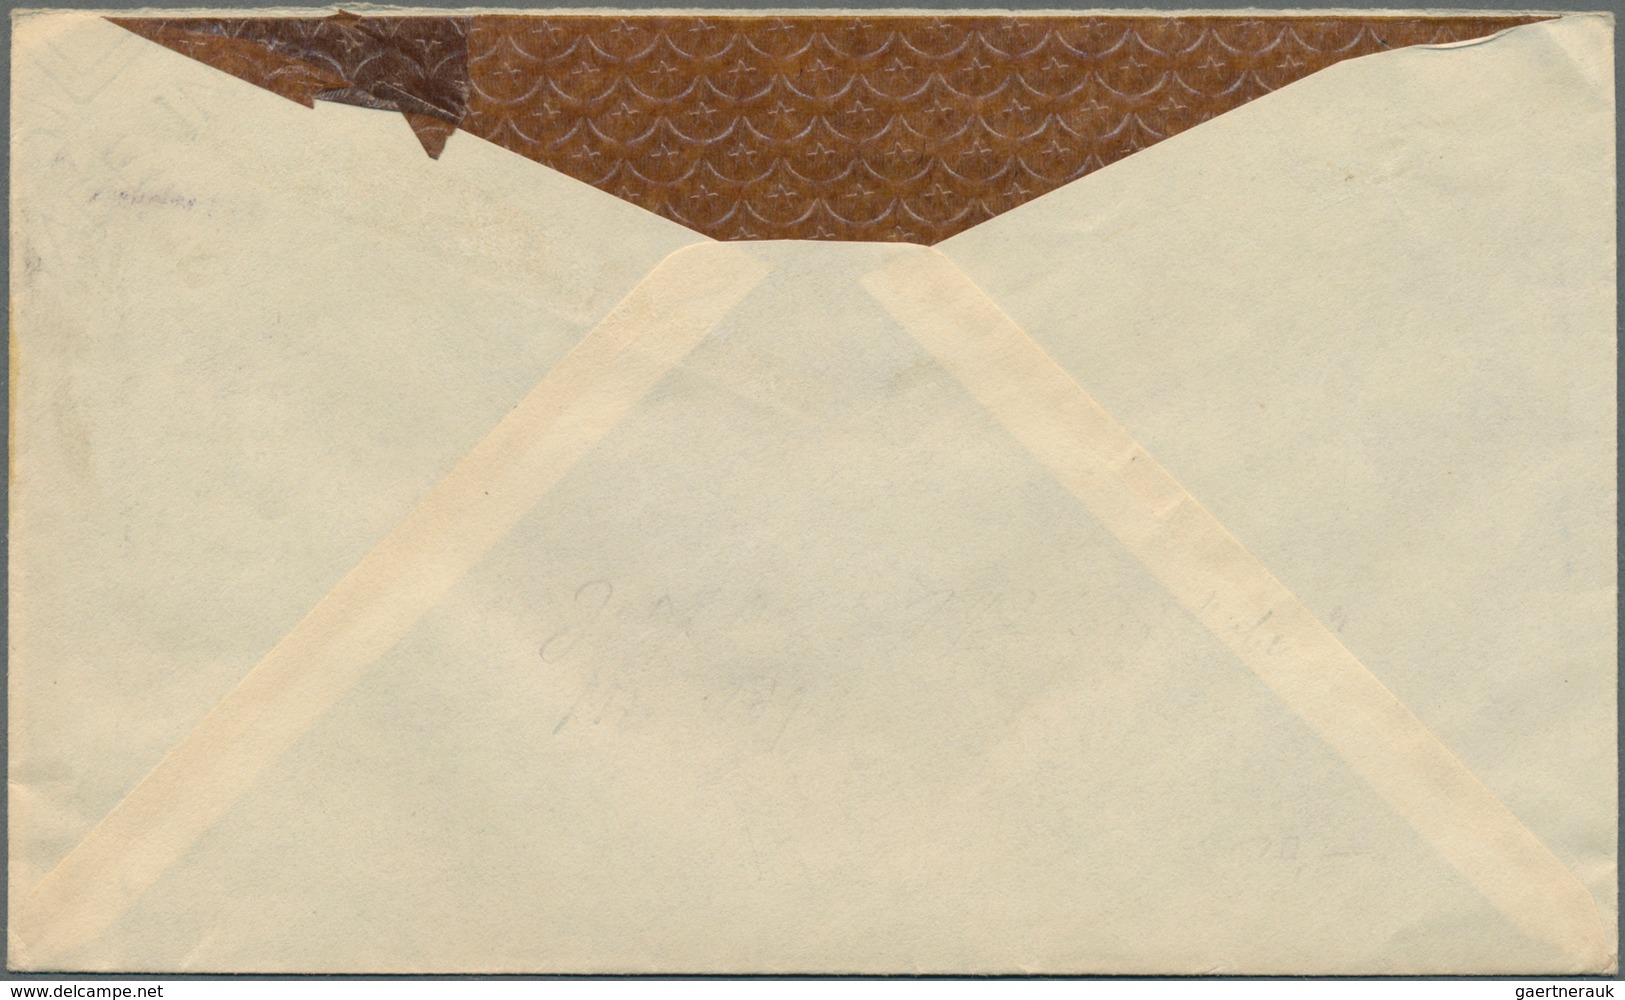 Mandschuko (Manchuko): 1937, 4 F. (pair) And 10 F. Tied "Harbin 4.3.18" To Air Mail Cover To Dairen - 1932-45 Mandchourie (Mandchoukouo)